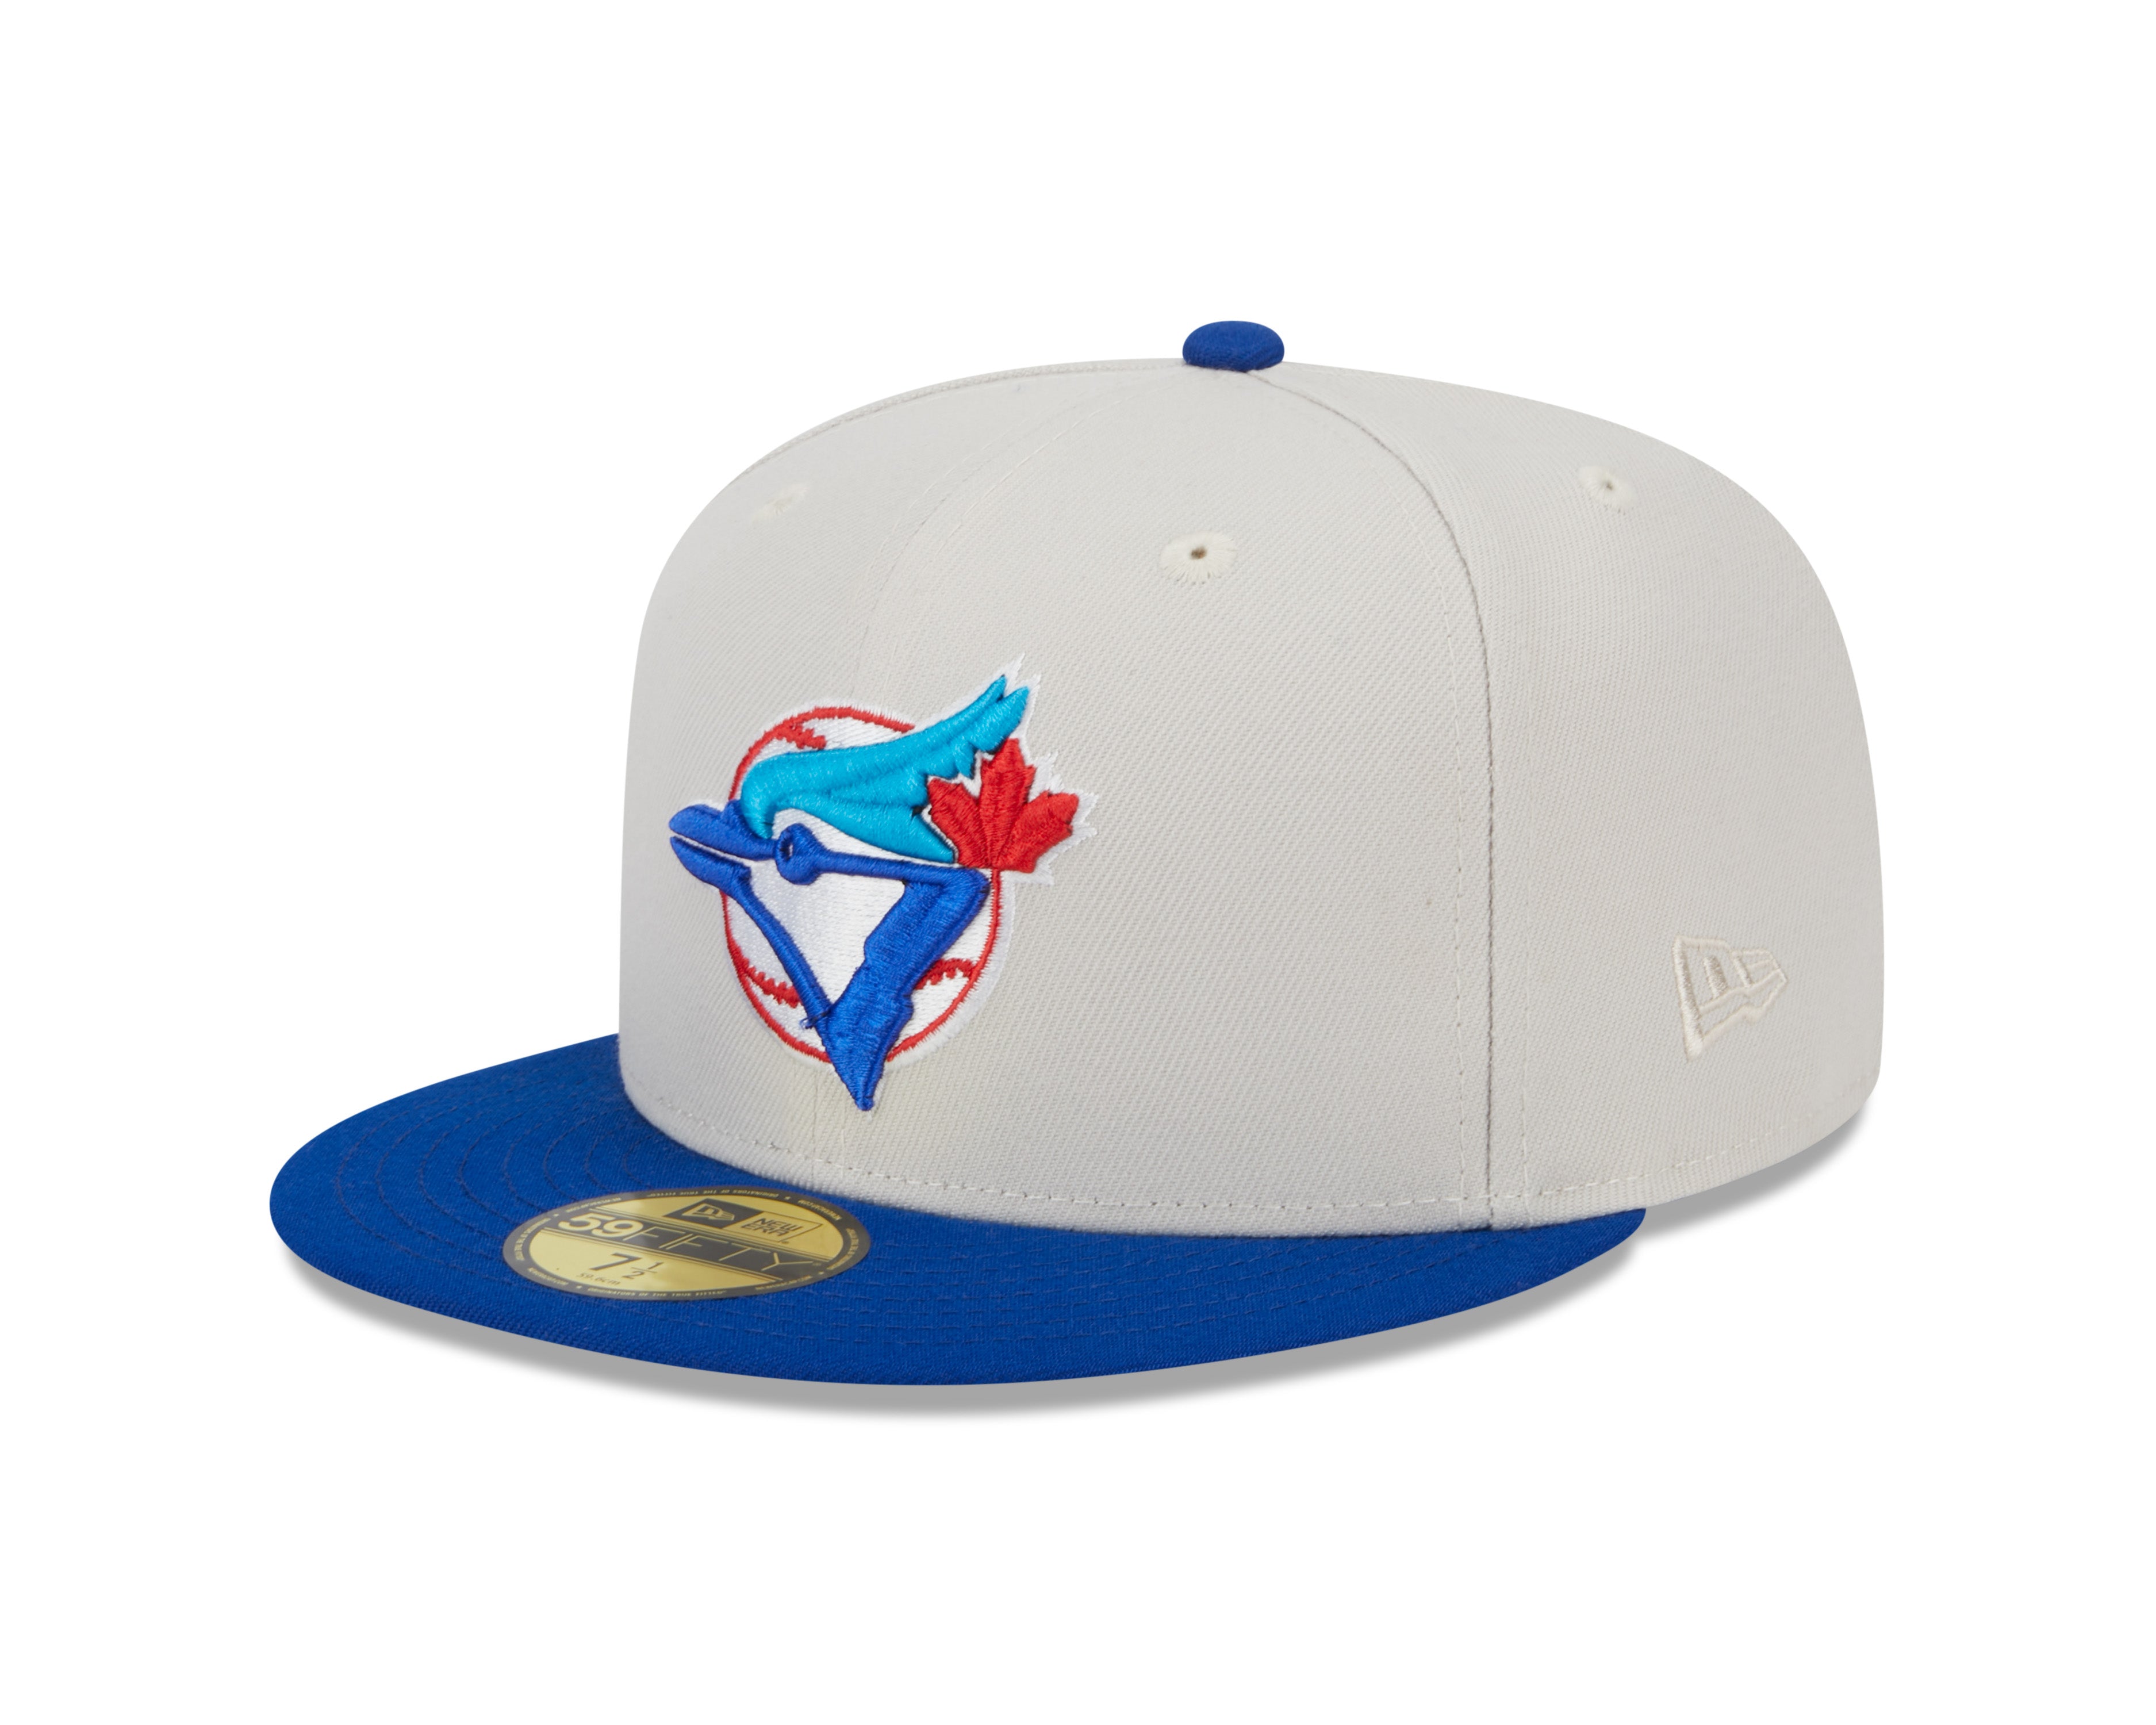 Toronto Baseball Hat Light Royal Blue 1997 Cooperstown AC New Era 59FIFTY Fitted Light Royal Blue / Light Royal Blue | Scarlet | White / 7 3/8